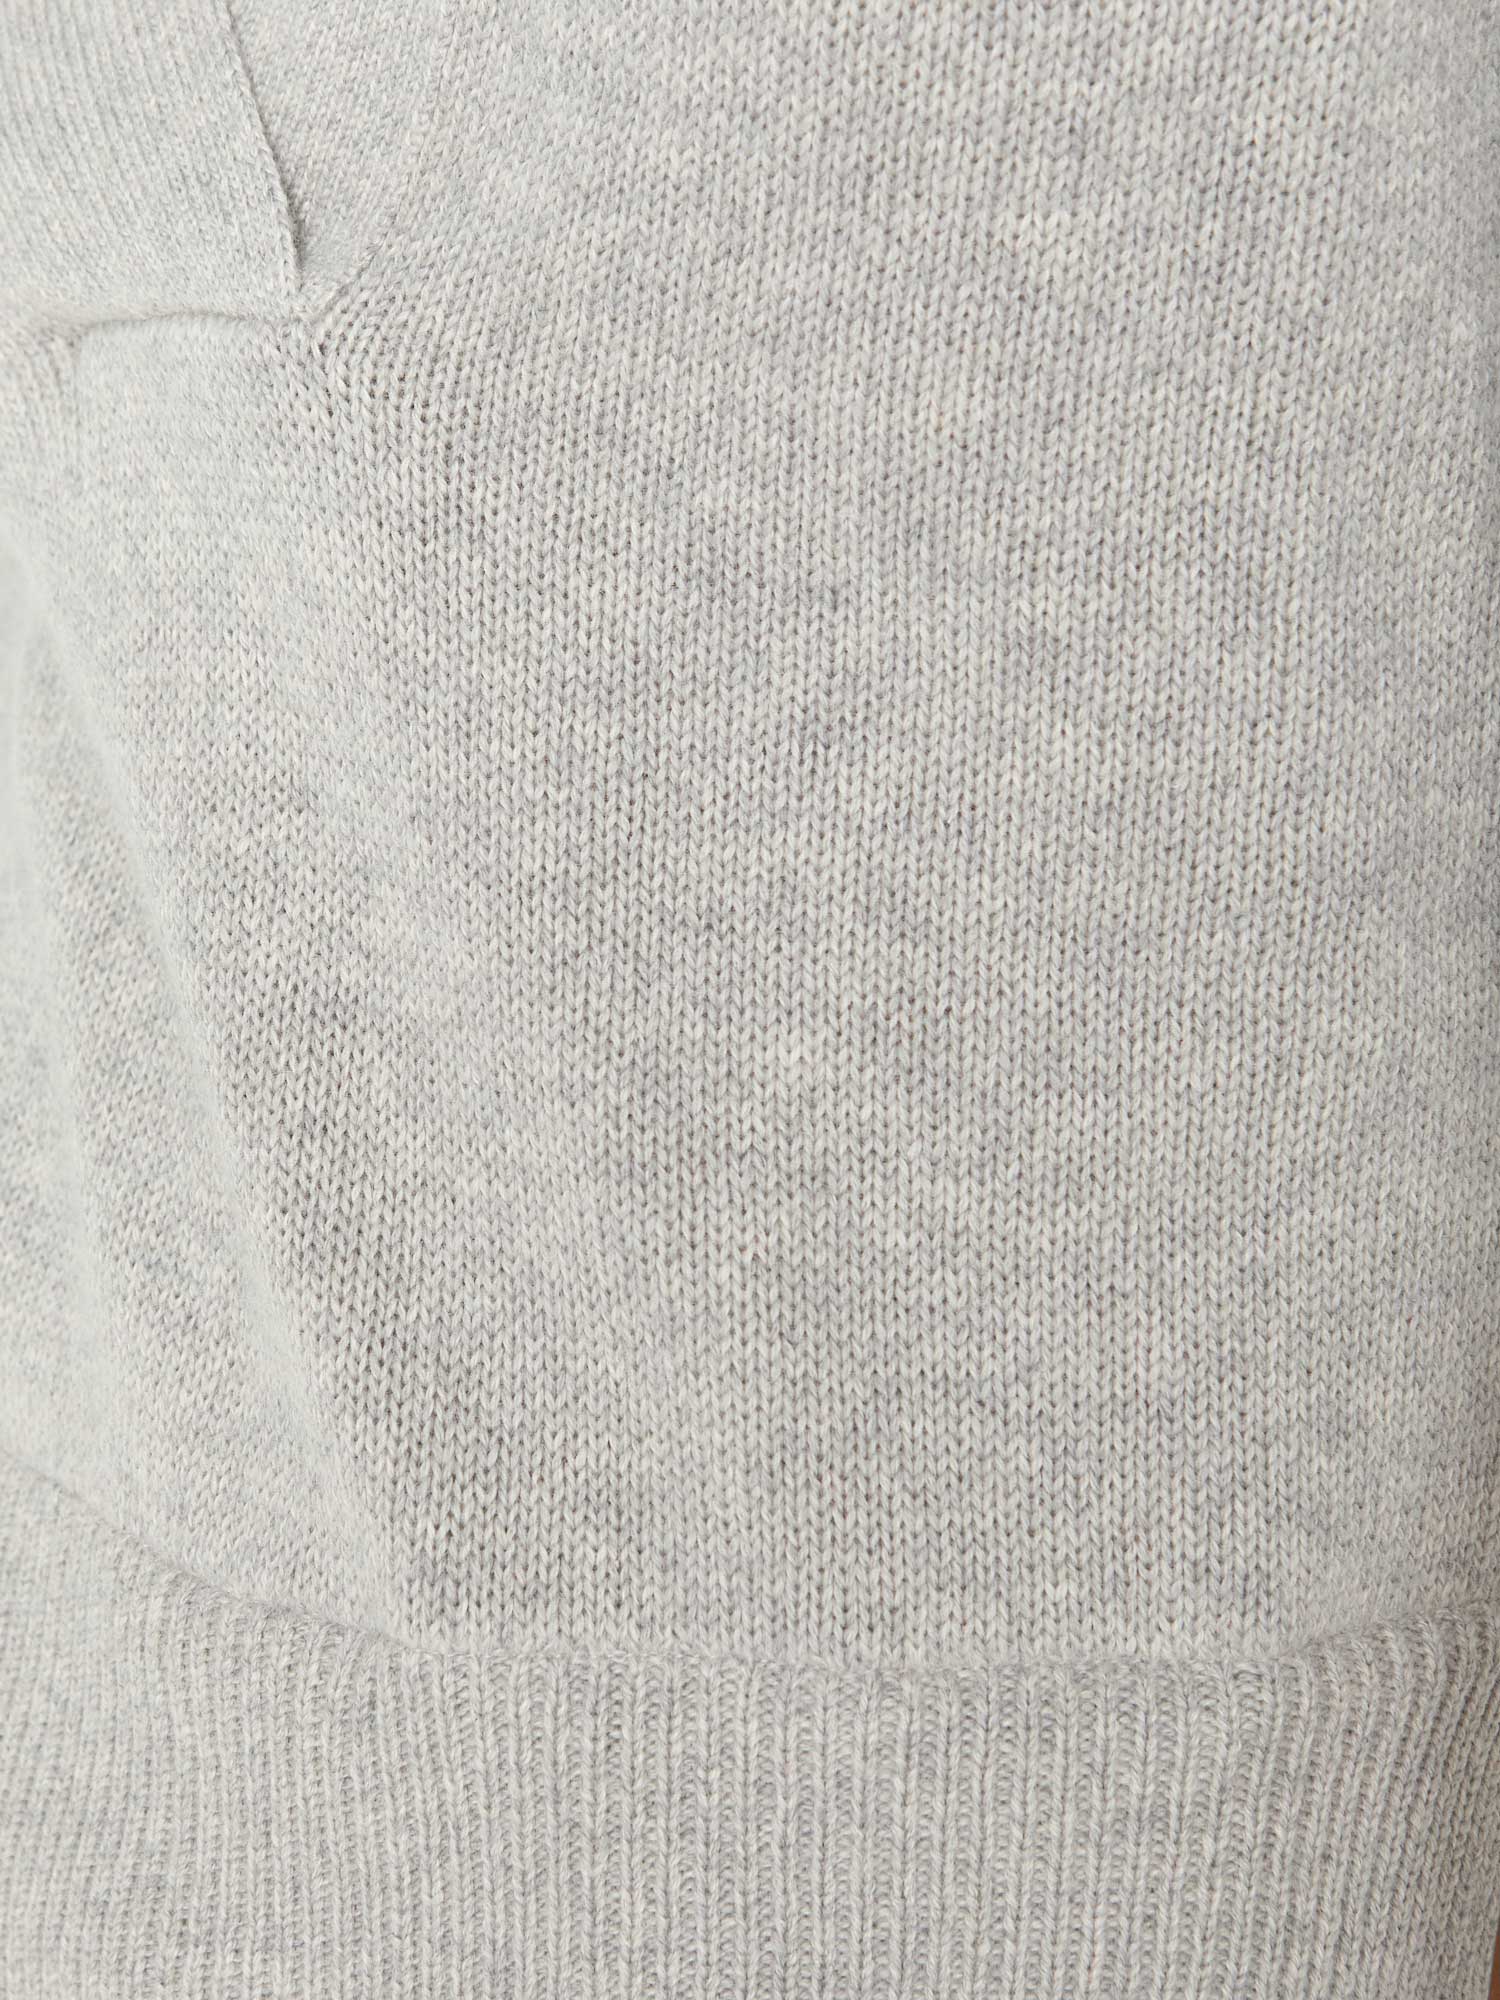 Lucie grey with white layered three-quarter sleeve v-neck sweater close up